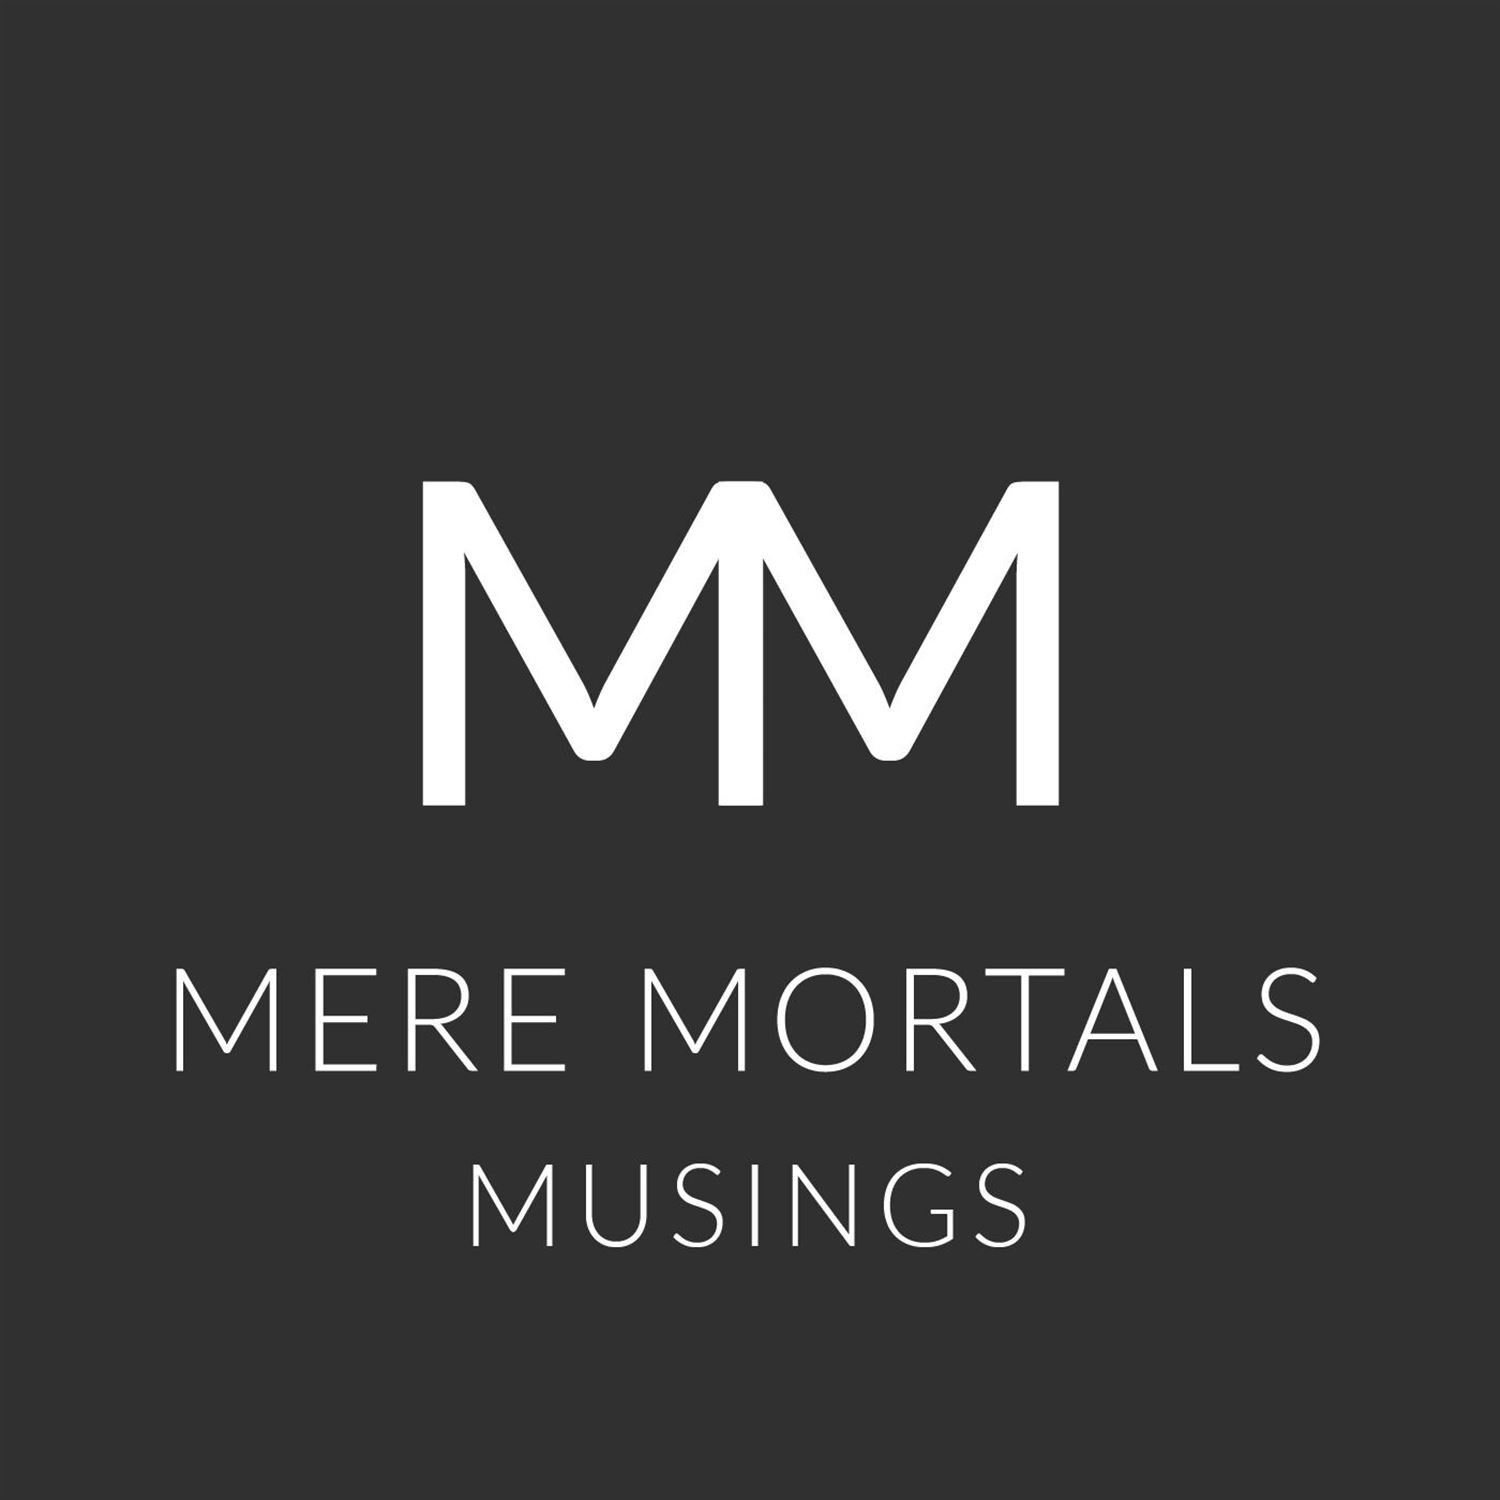 Don't Sweat The Small Stuff (Mere Mortals Episode #52 - Musings)